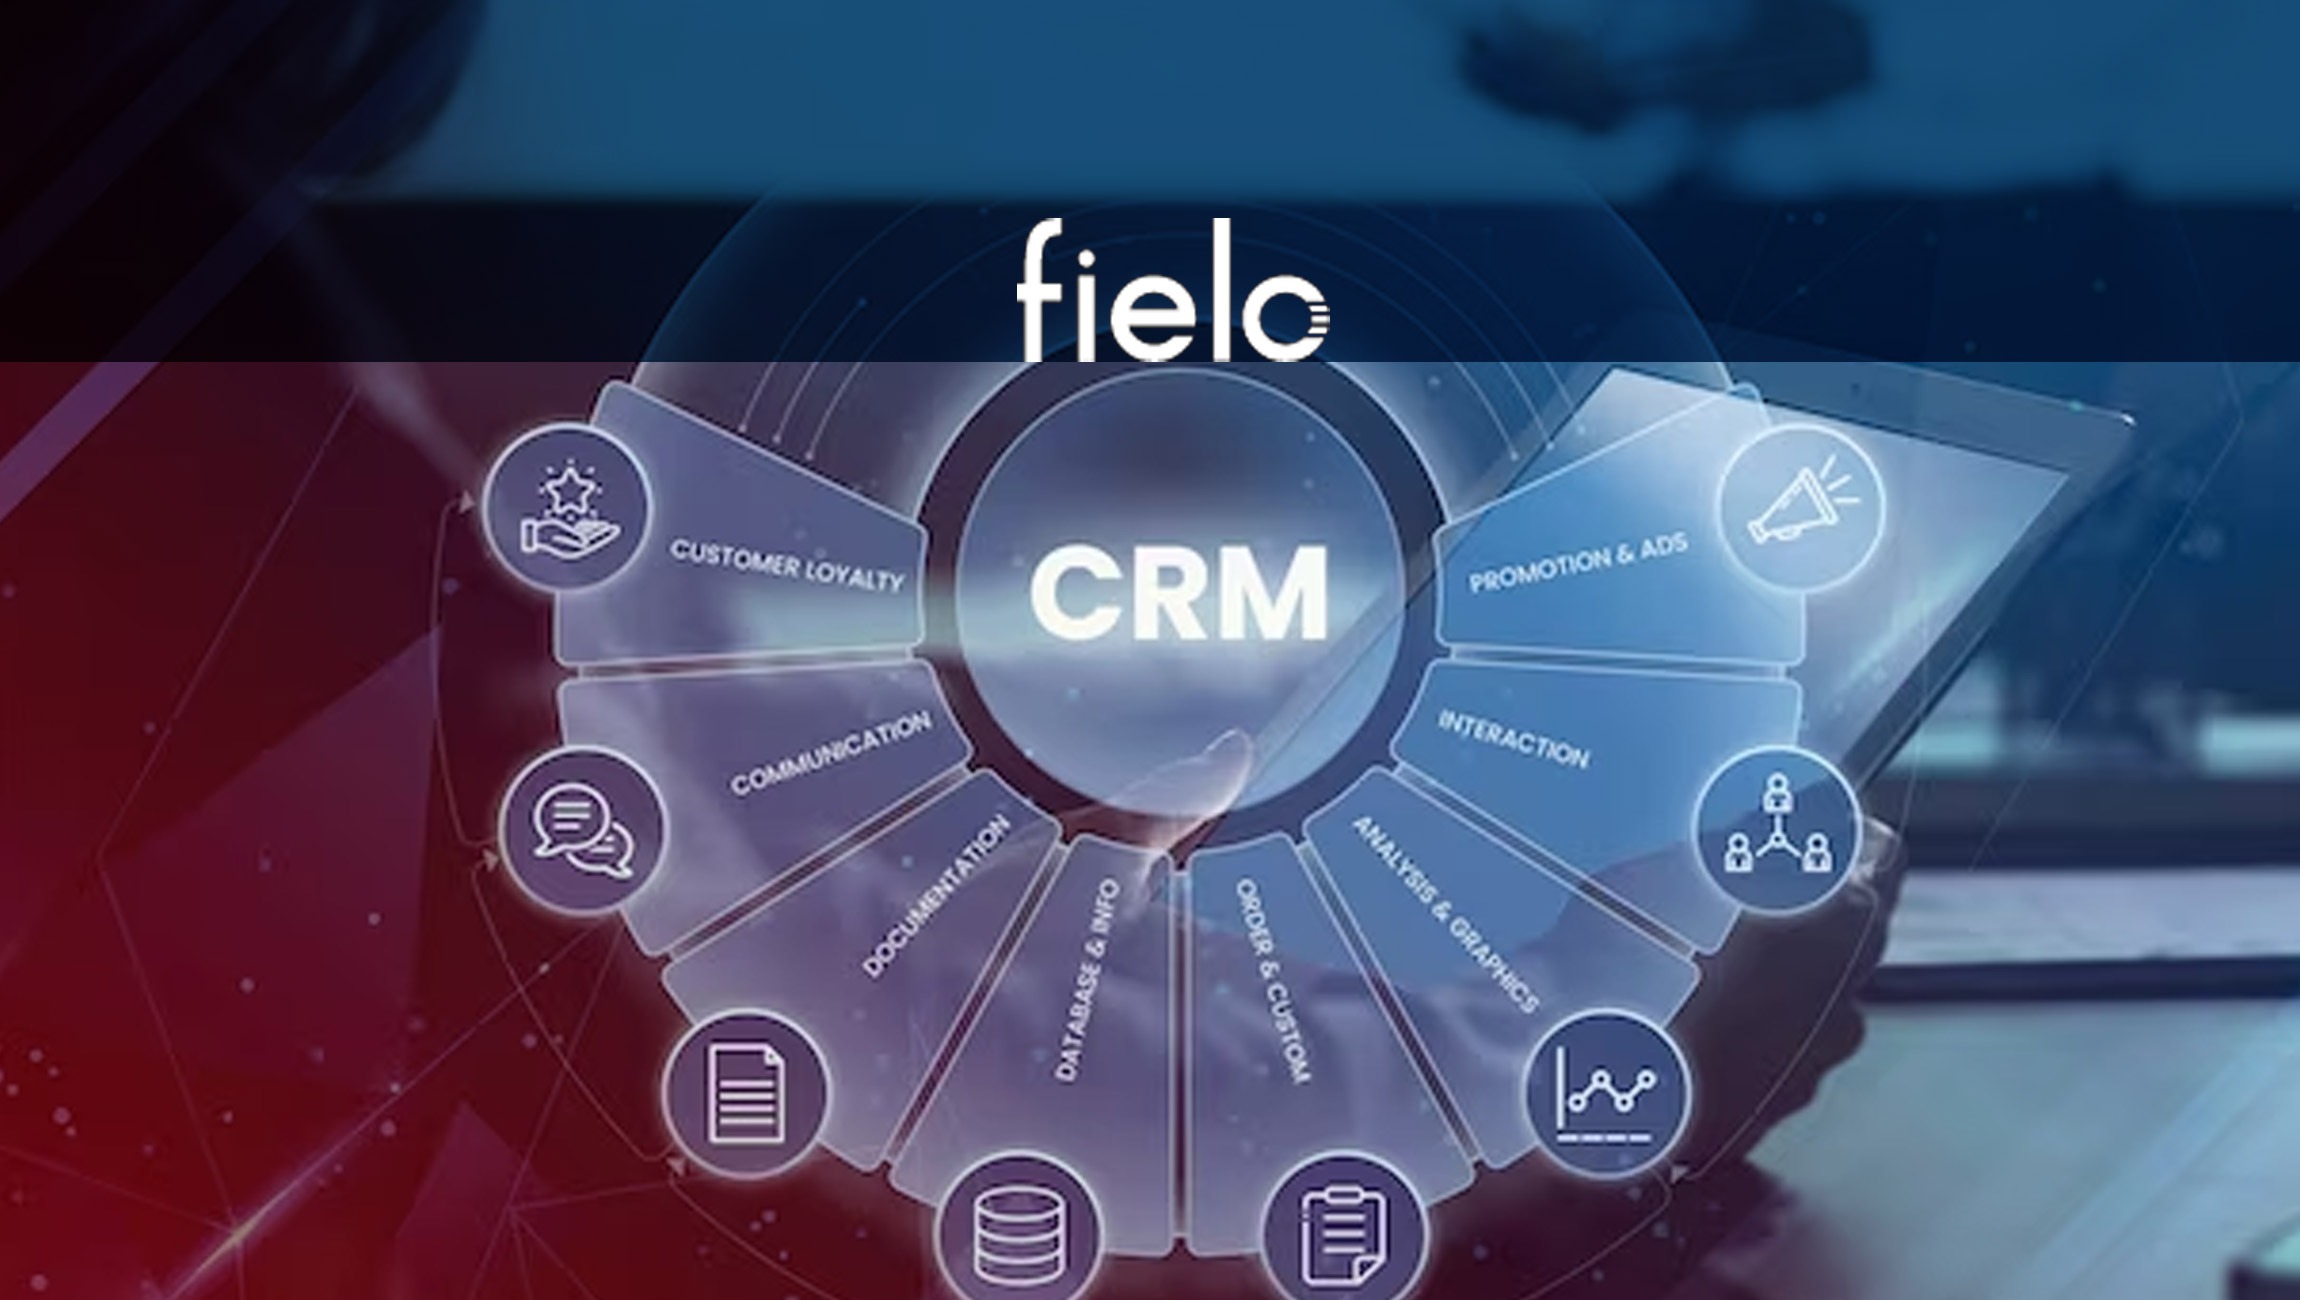 Fielo-unveils-RevOps-product-for-Salesforce-CRM-customers-to-create-the-perfect-sales-execution-playbook